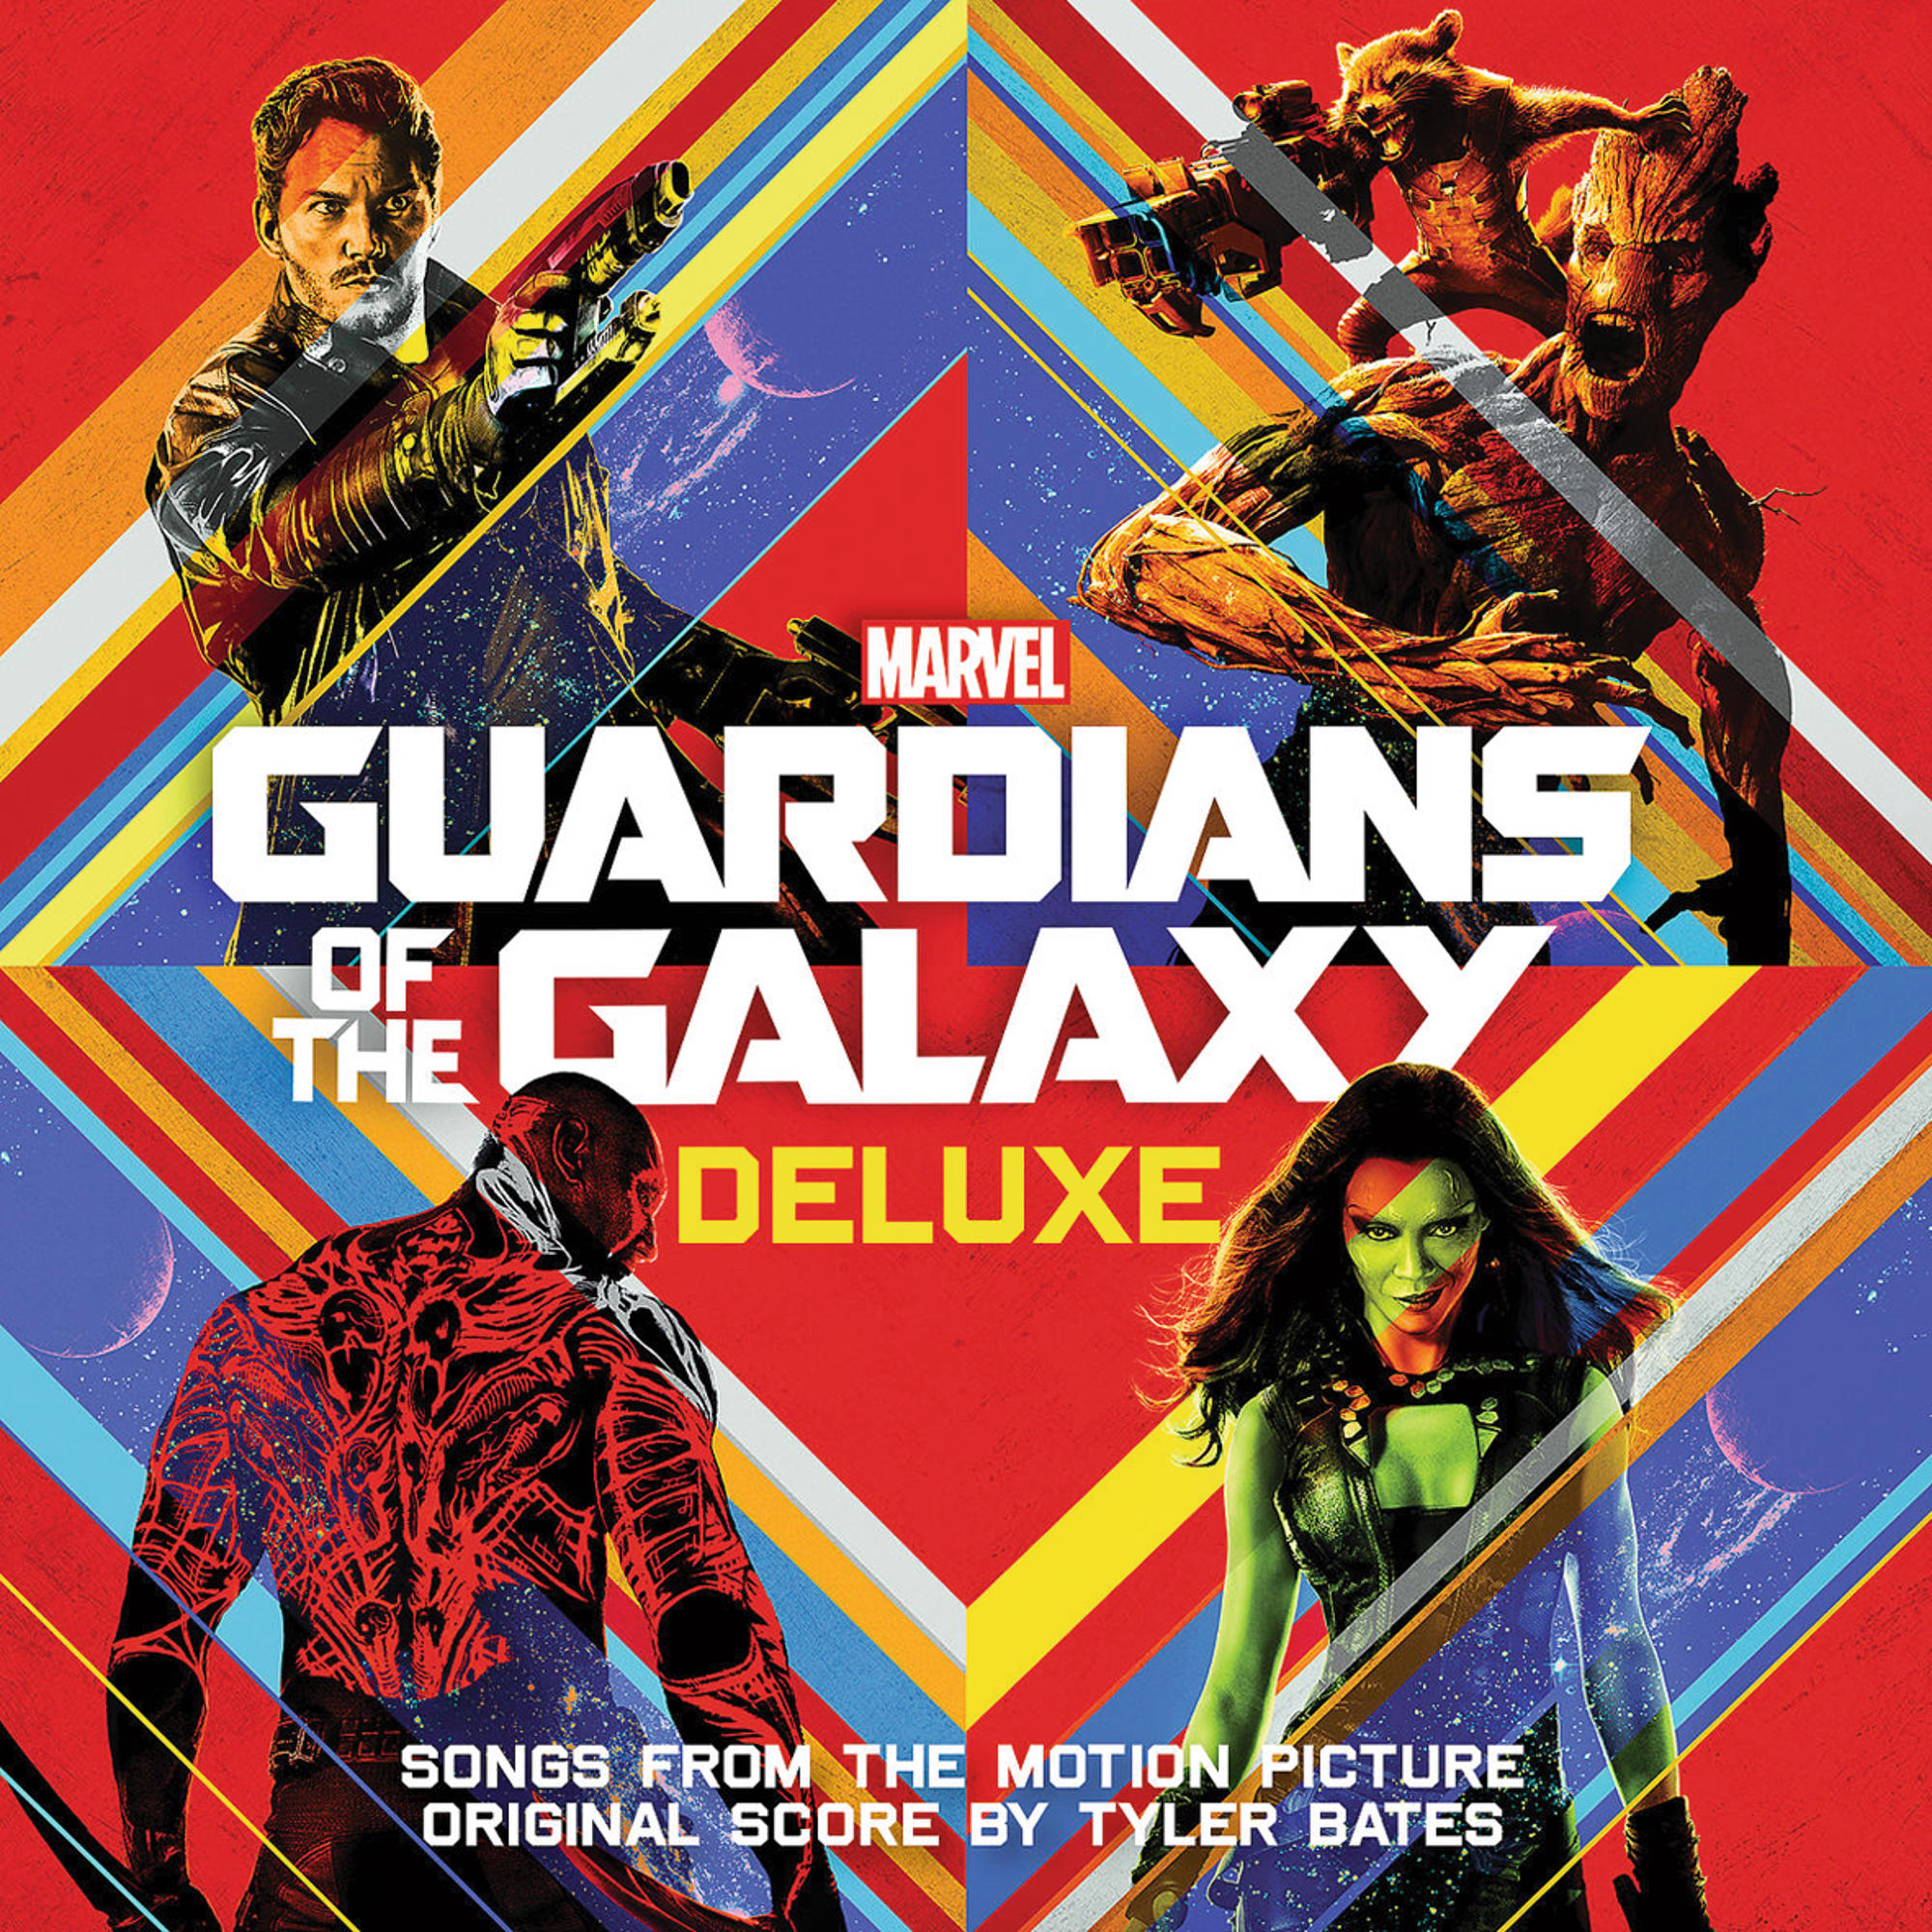 VARIOUS - Guardians Of Mix - The Edition) (Deluxe Awesome - Galaxy (CD)